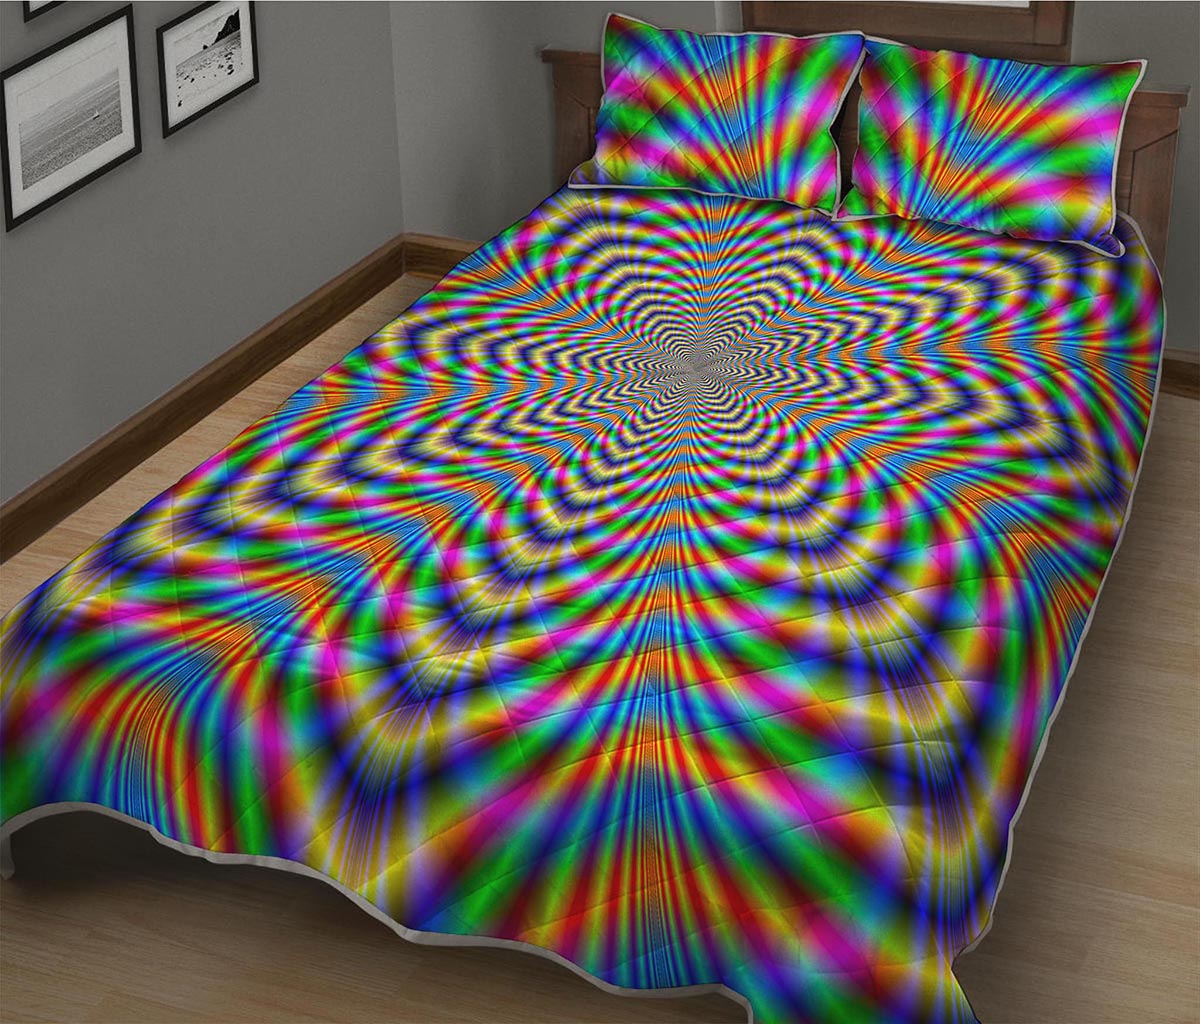 Octagonal Psychedelic Optical Illusion Quilt Bed Set